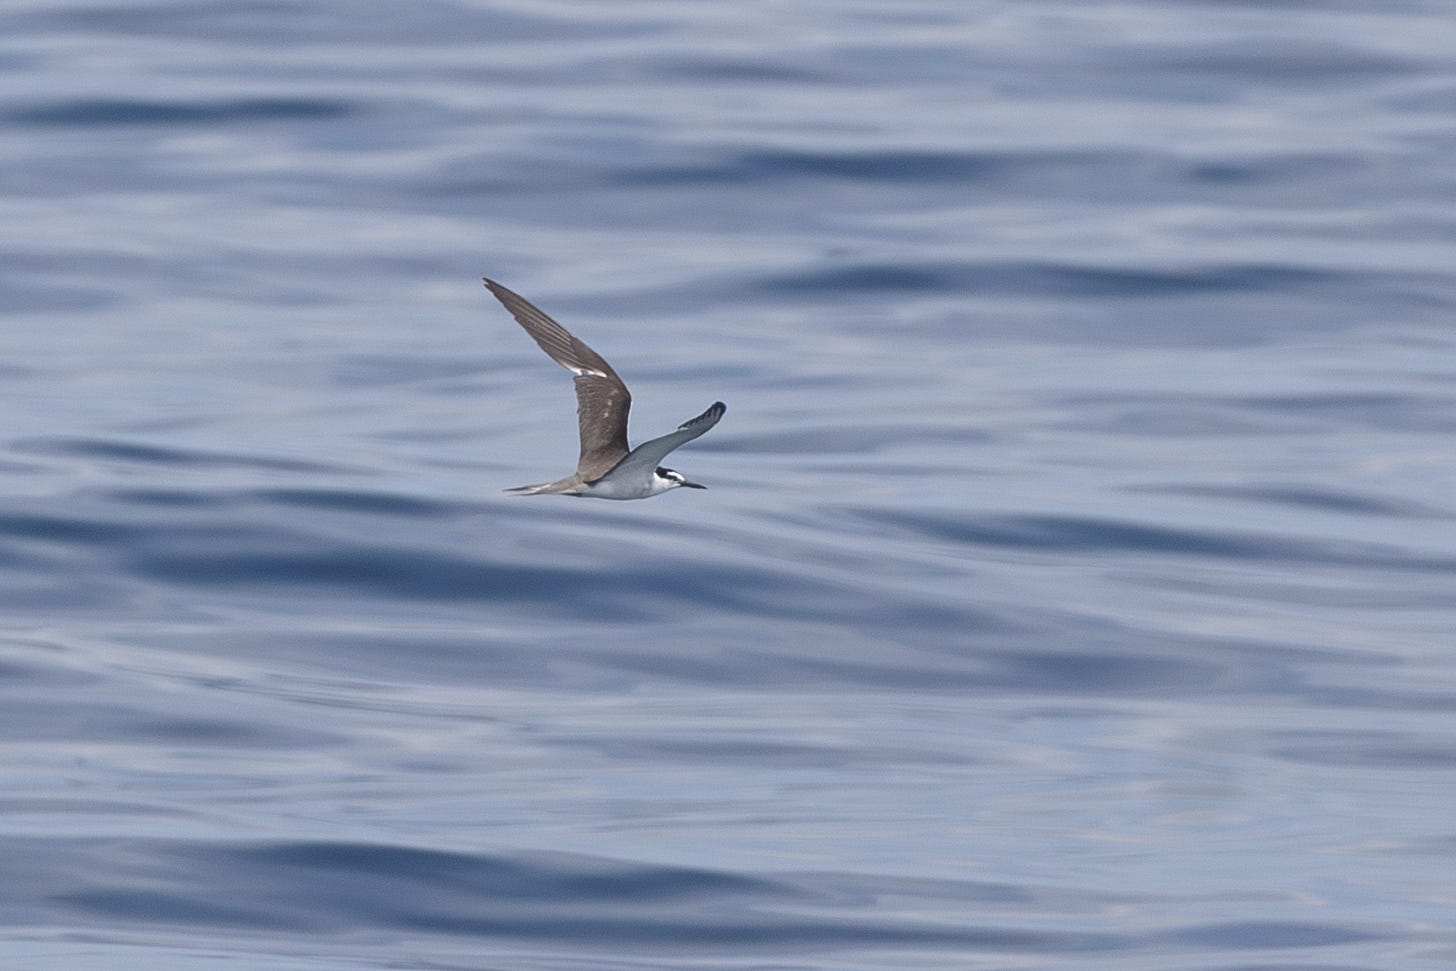 a white-bellied bird with long, pointed, dark wings flying to the left against the sea. it has a dark cap and lines through tis eyes connecting the cap to its black beak, like a bridle.